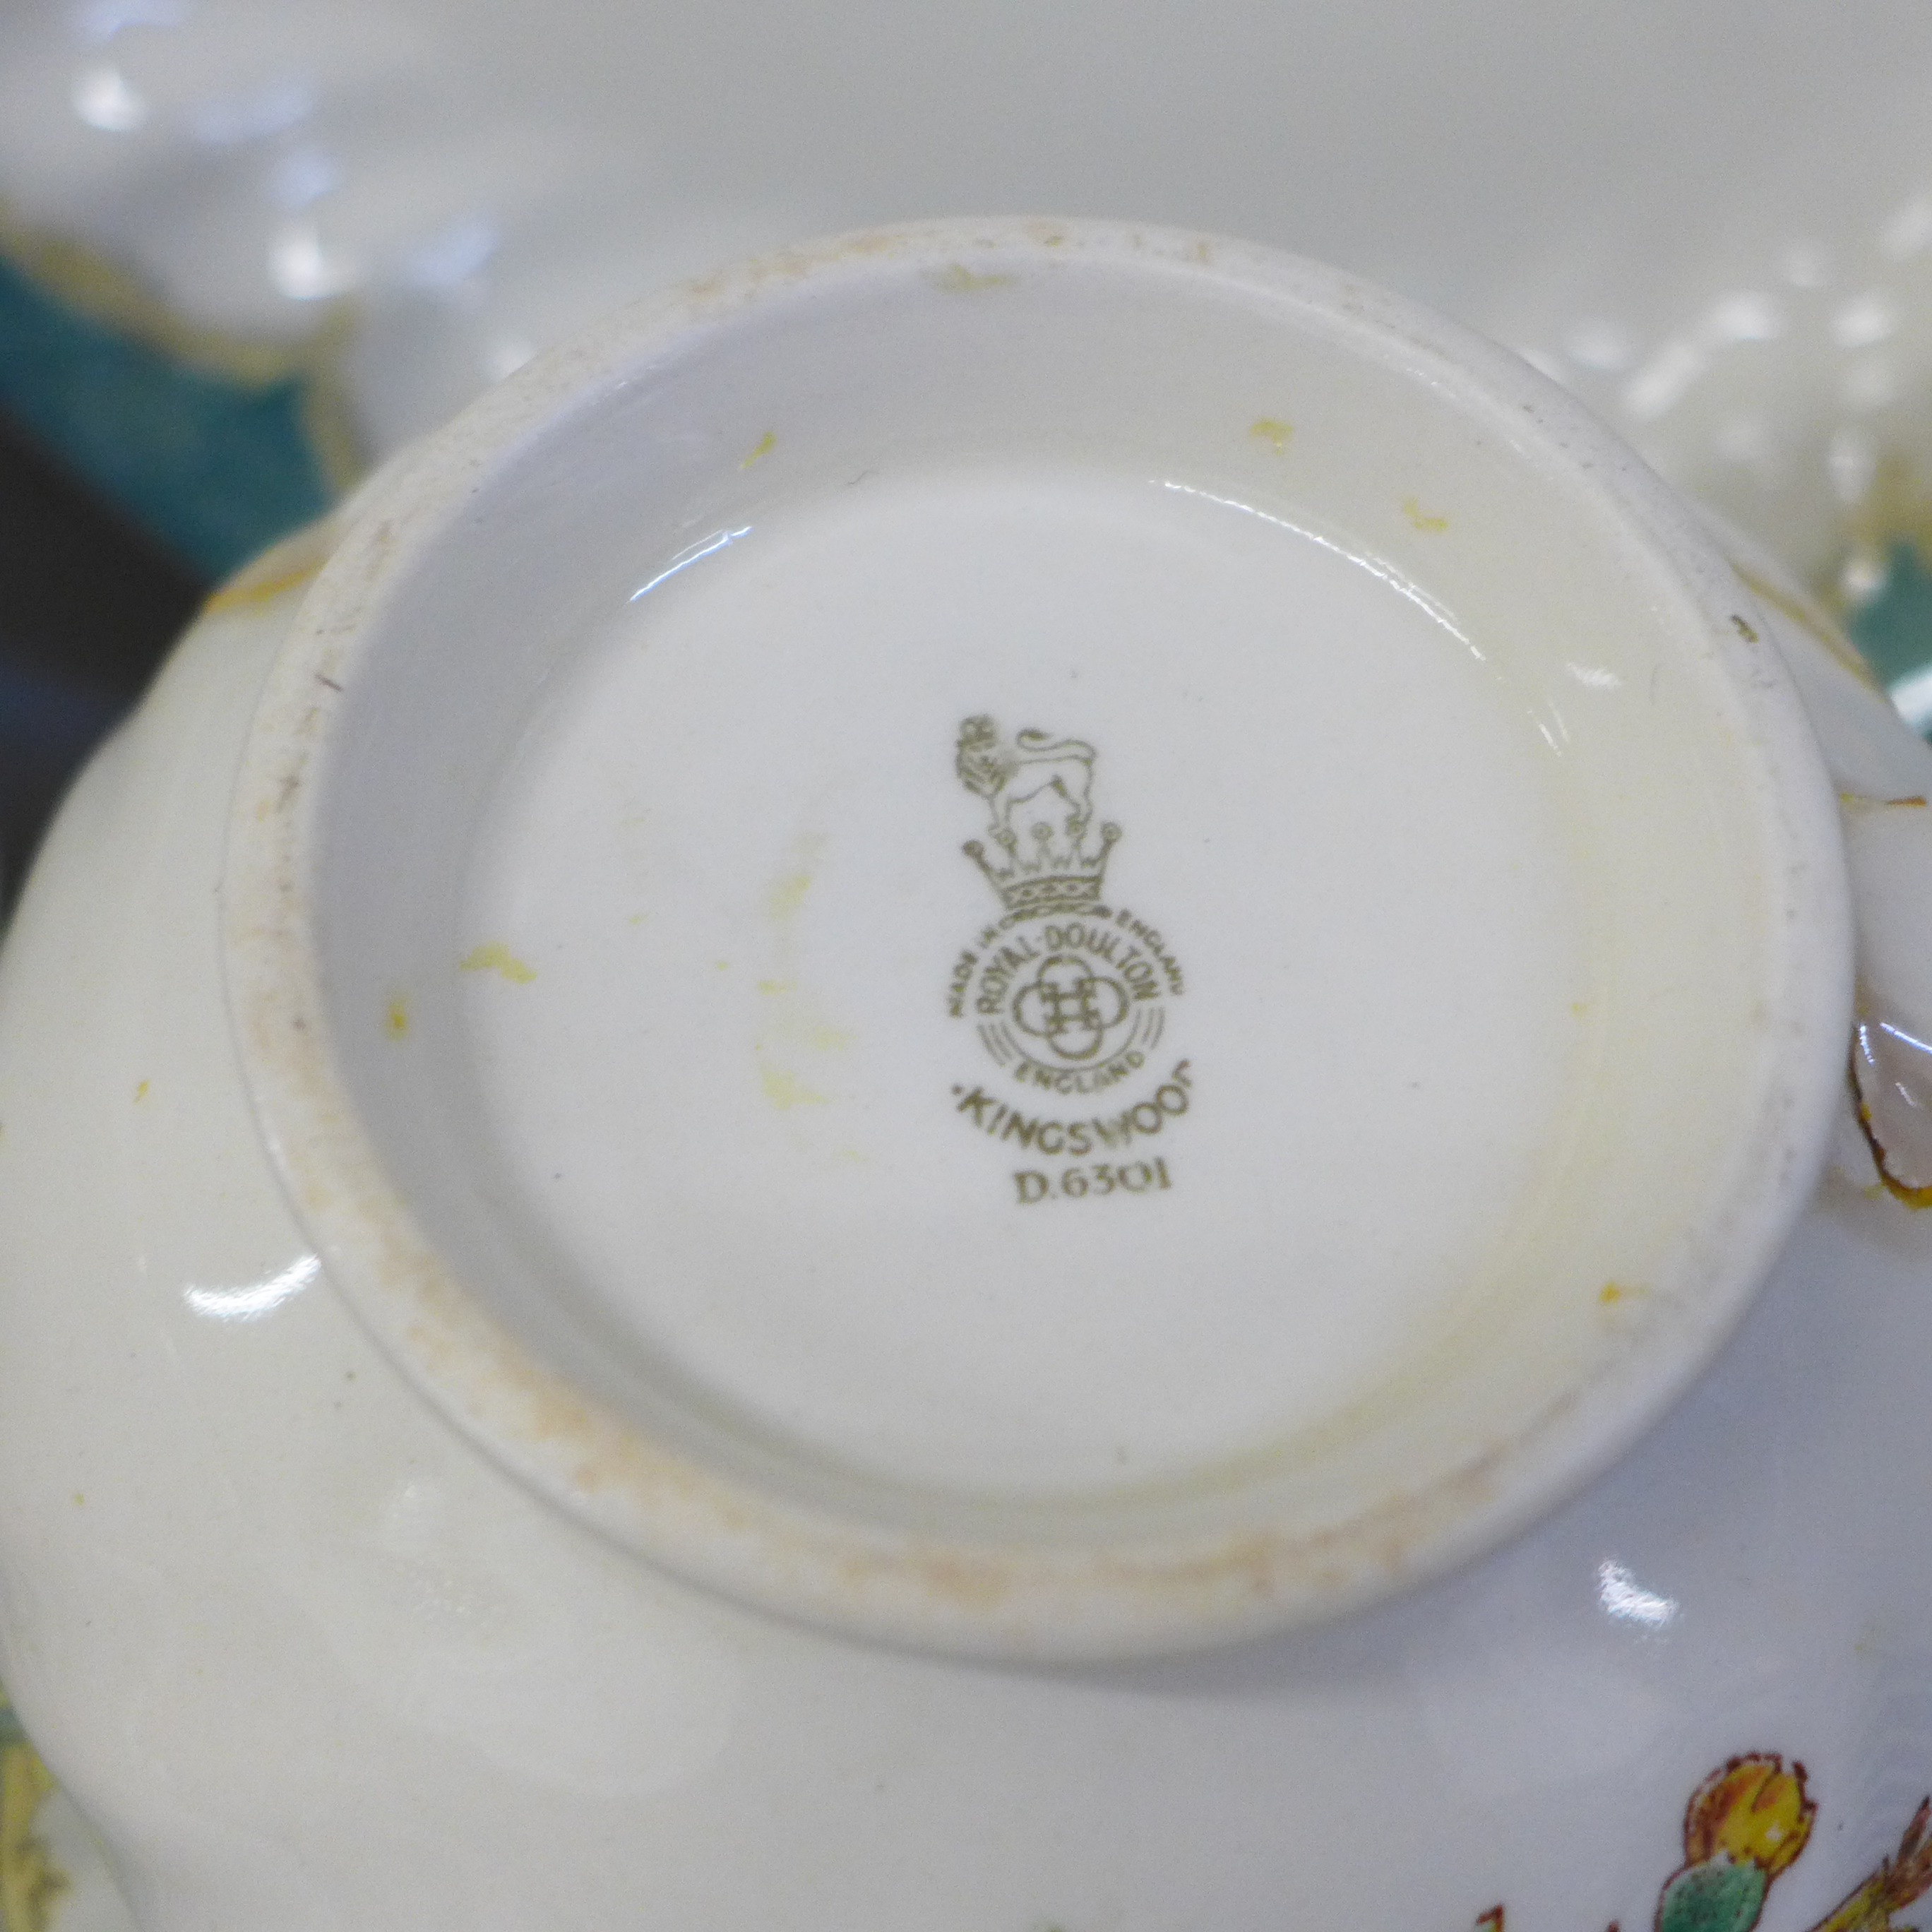 Royal Doulton Kingswood D3601 part dinner service with two tureens and two graduated serving plates, - Image 5 of 5